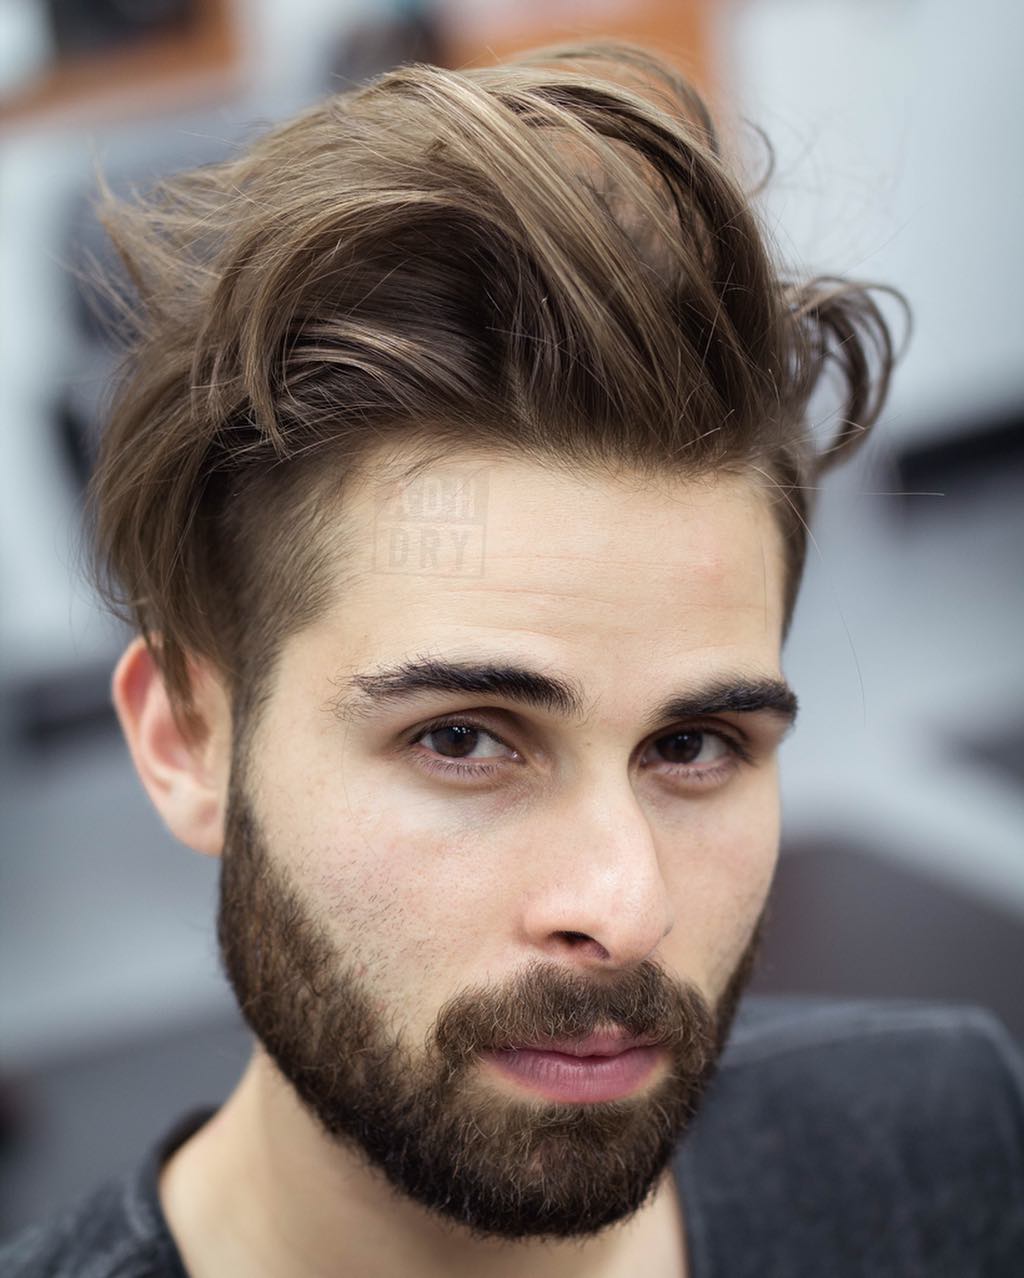 How To Grow Your Hair Out Men S Tutorial